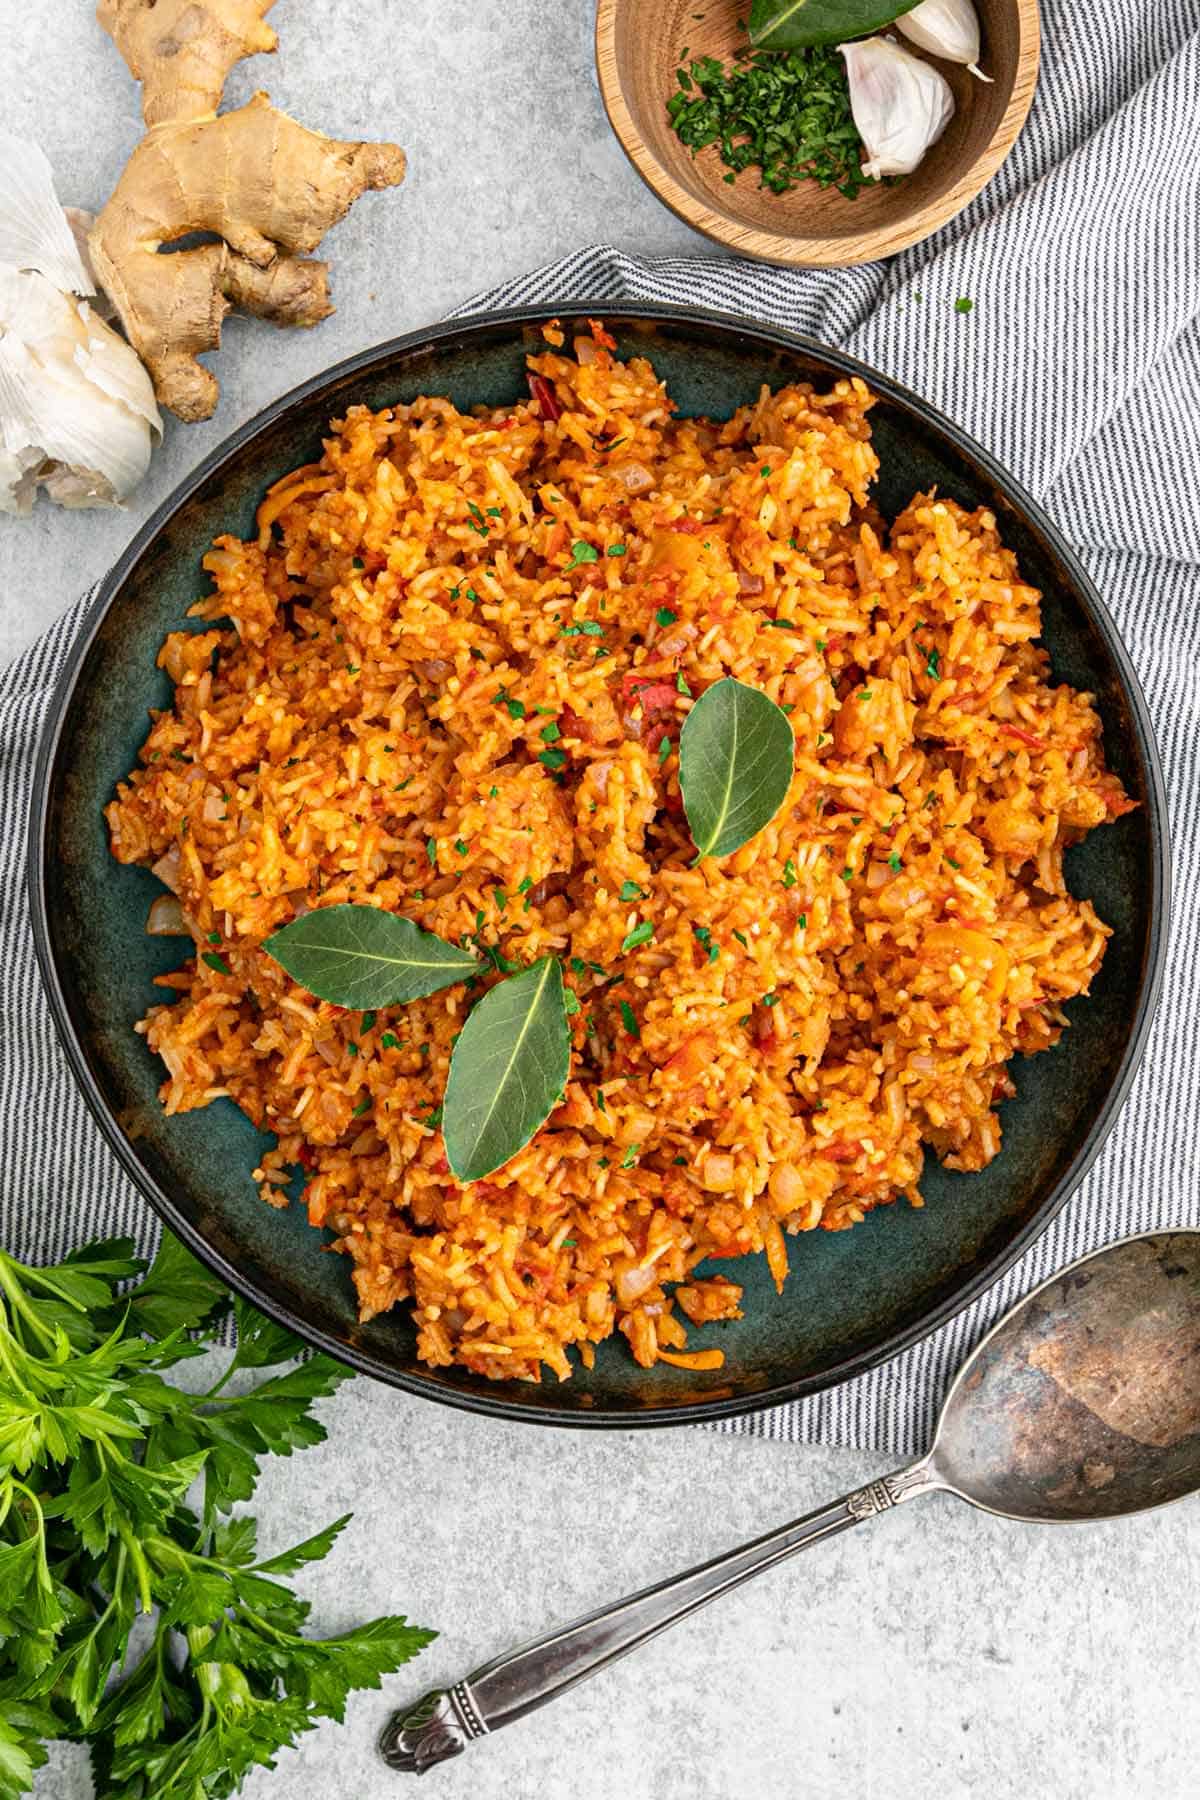 A bowl of jollof rice on the table with bay leaves on top.